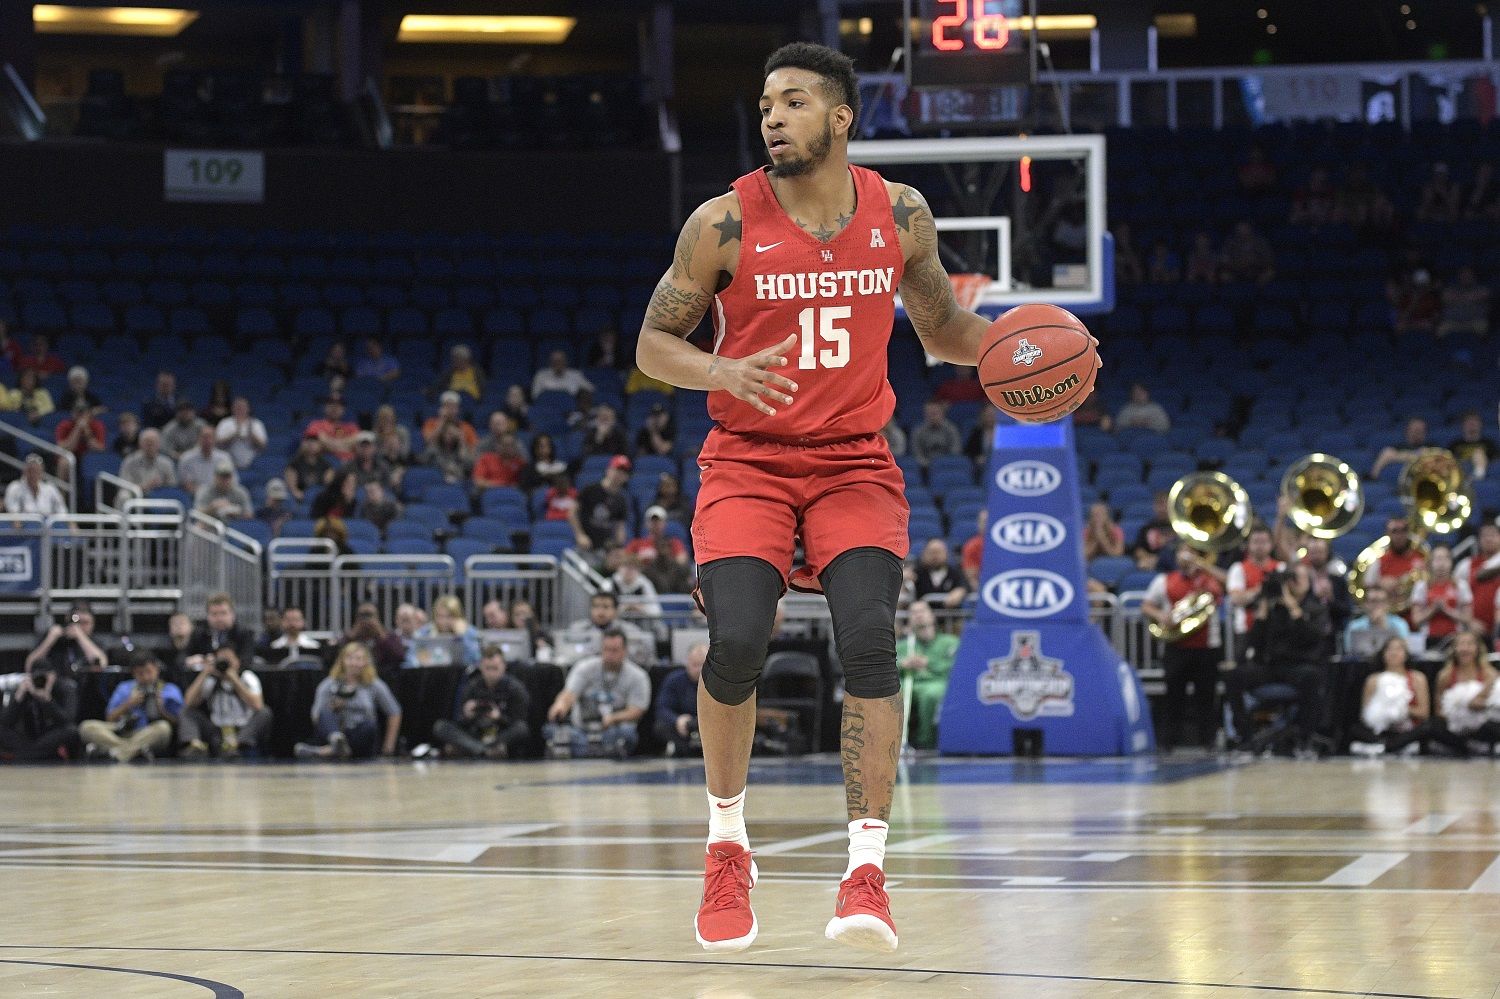 Houston forward Devin Davis (15) sets up a play during the first half of an NCAA college basketball championship game against Cincinnati at the American Athletic Conference tournament Sunday, March 11, 2018, in Orlando, Fla. (AP Photo/Phelan M. Ebenhack)